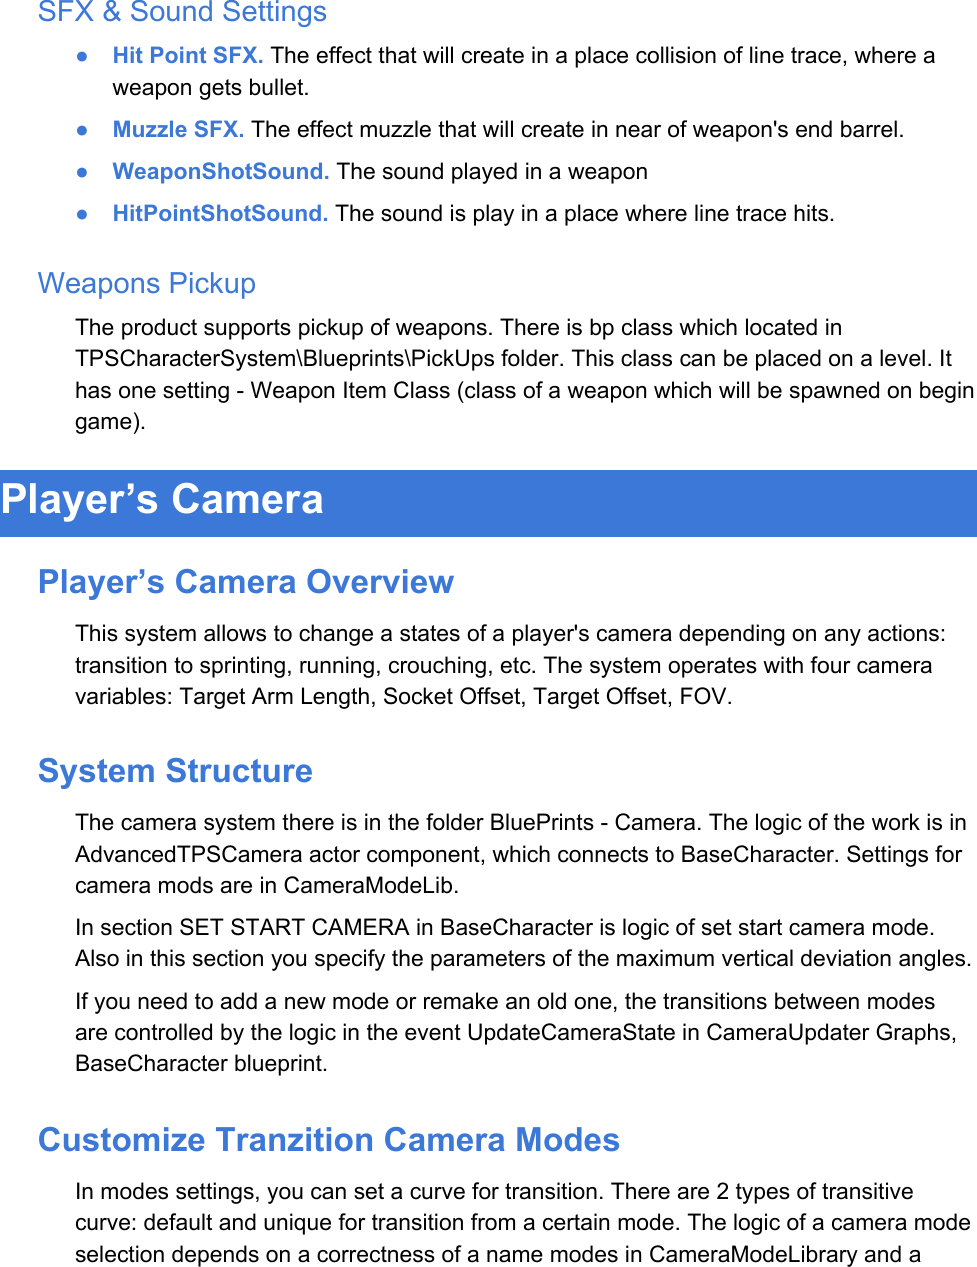 Page 9 of 12 - TPSCS - Guide V 1.2.1